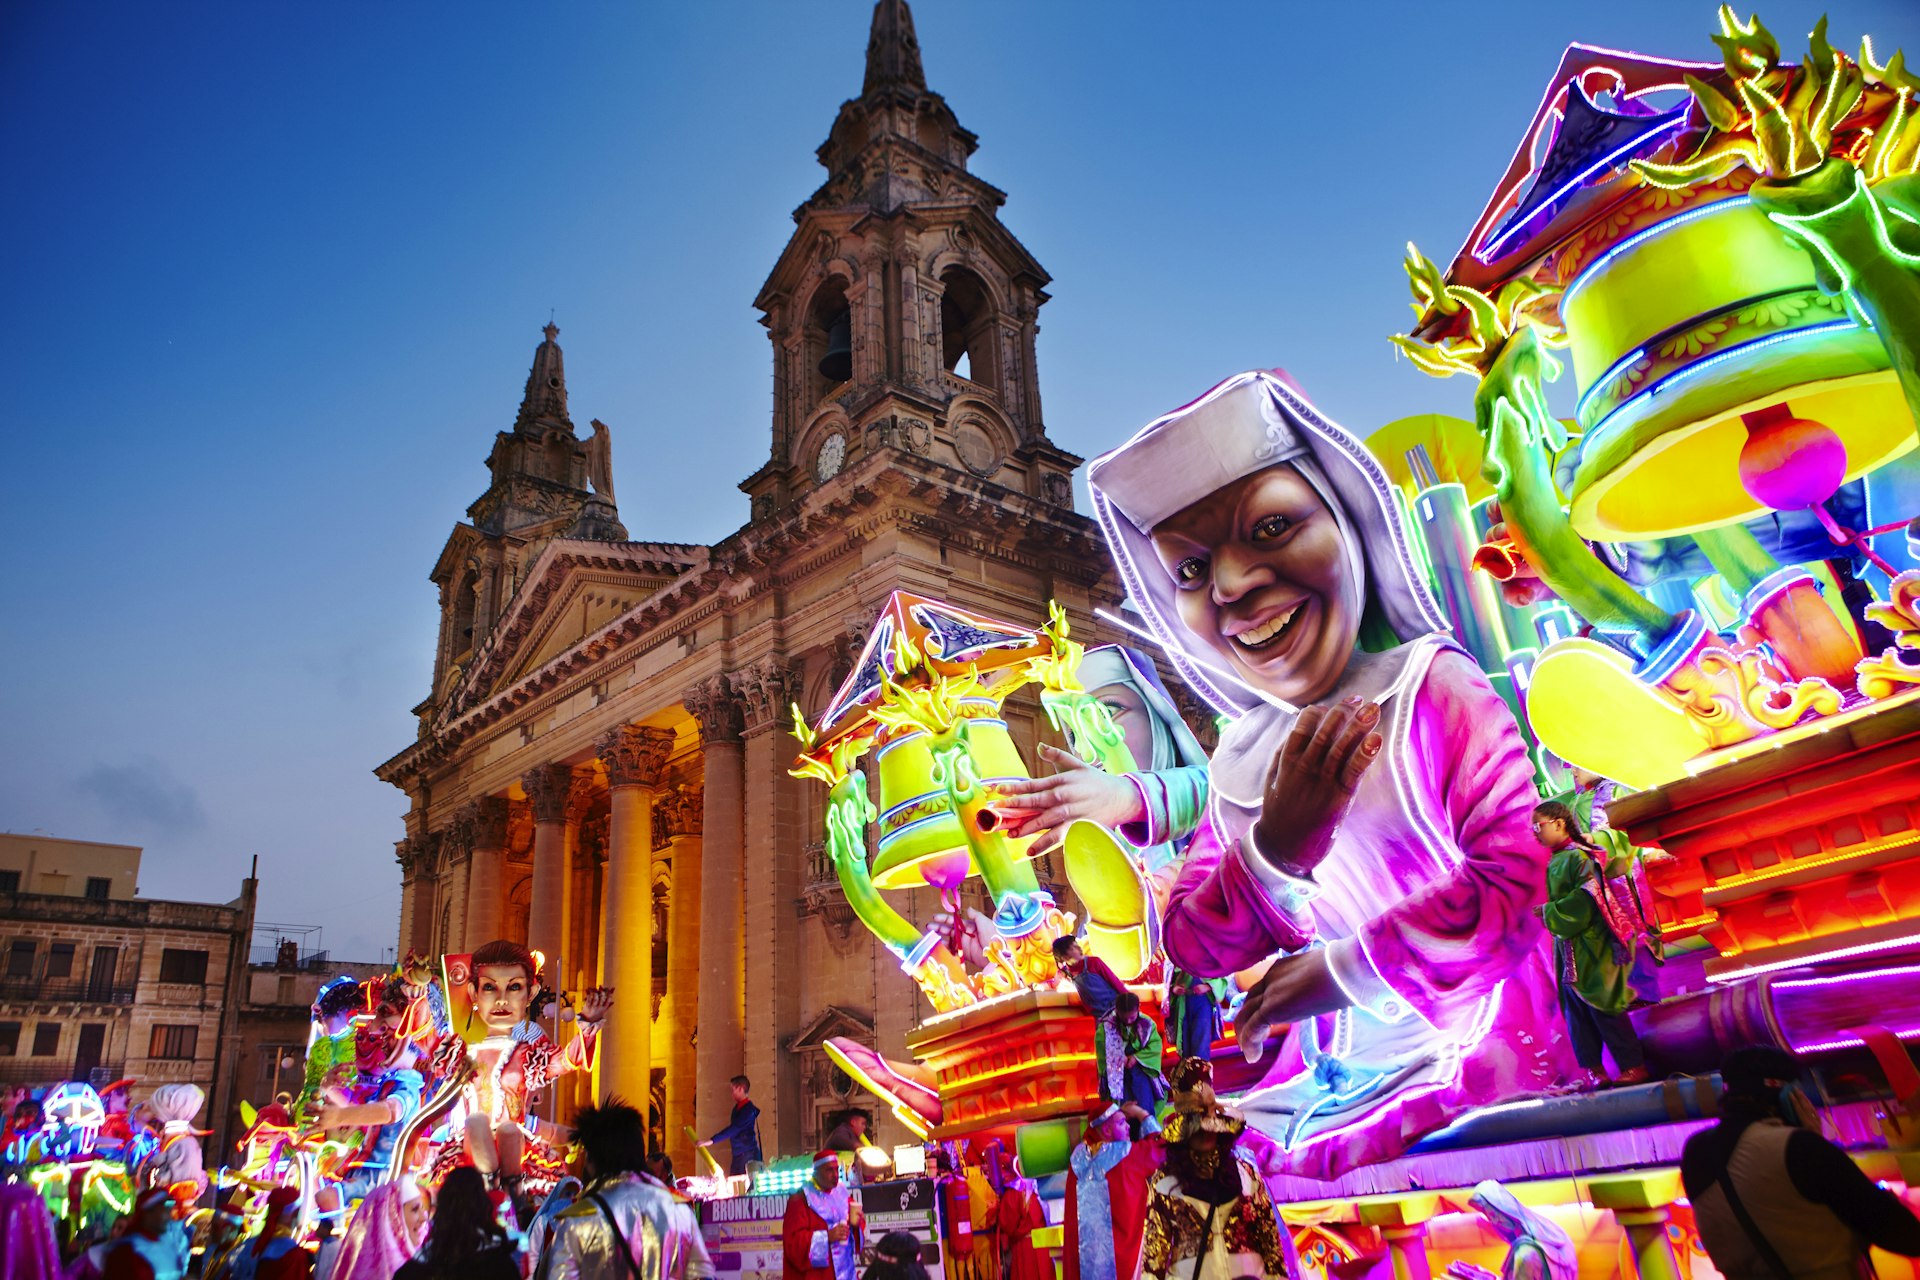 A neon-bright float inspired by the movie Sister Act passes by St Publius Parish Church in Floriana